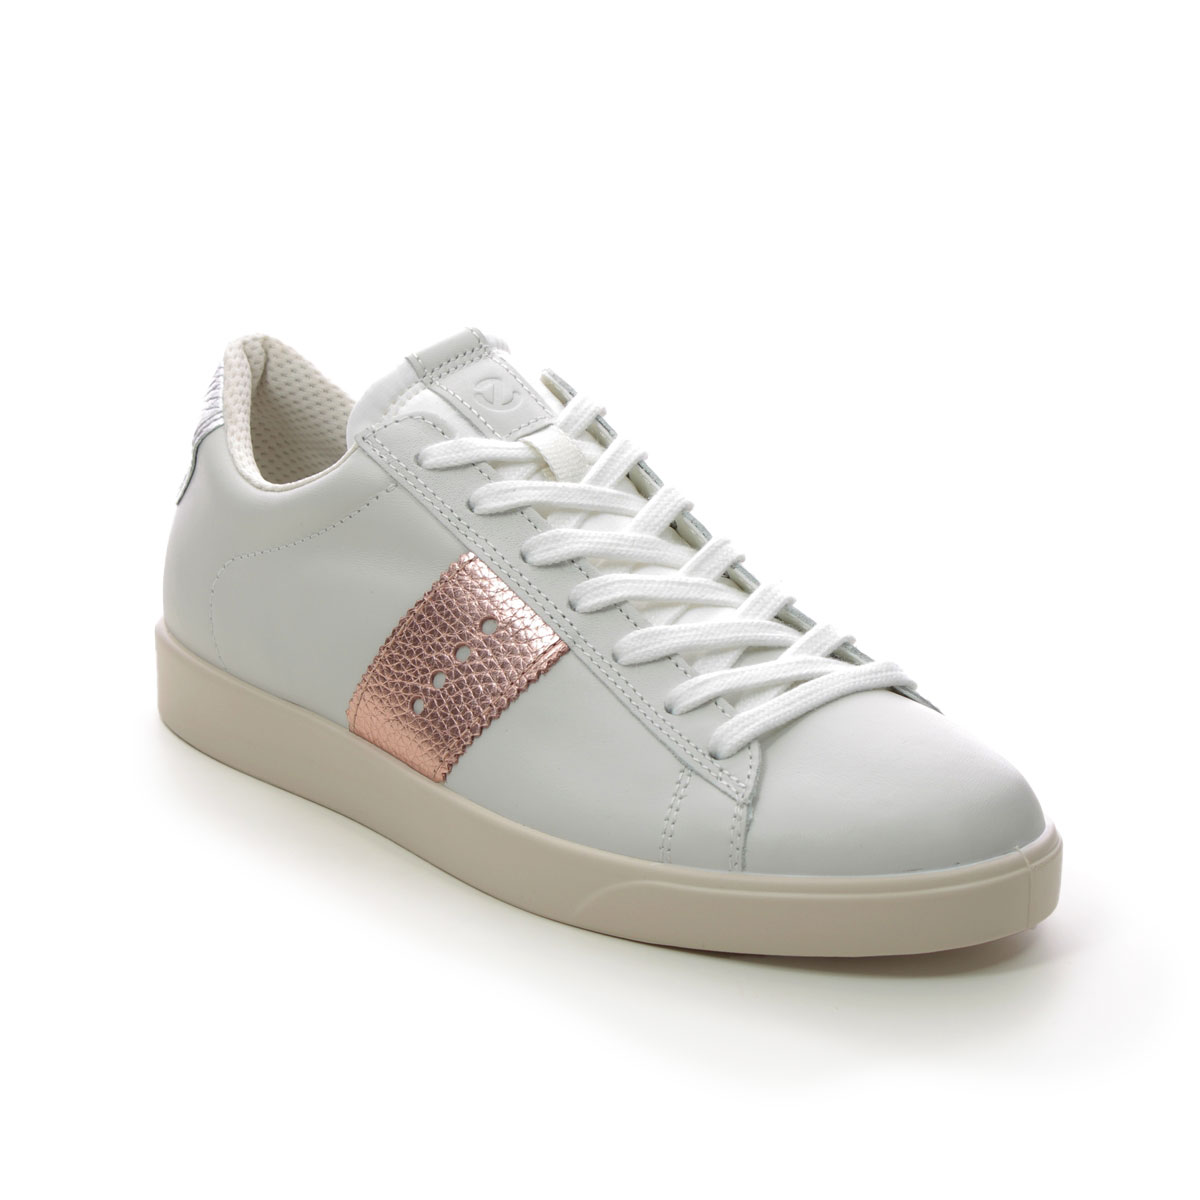 Ecco Street Lite Womens White Rose Gold Womens Trainers 212803-60717 In Size 38 In Plain White Rose Gold